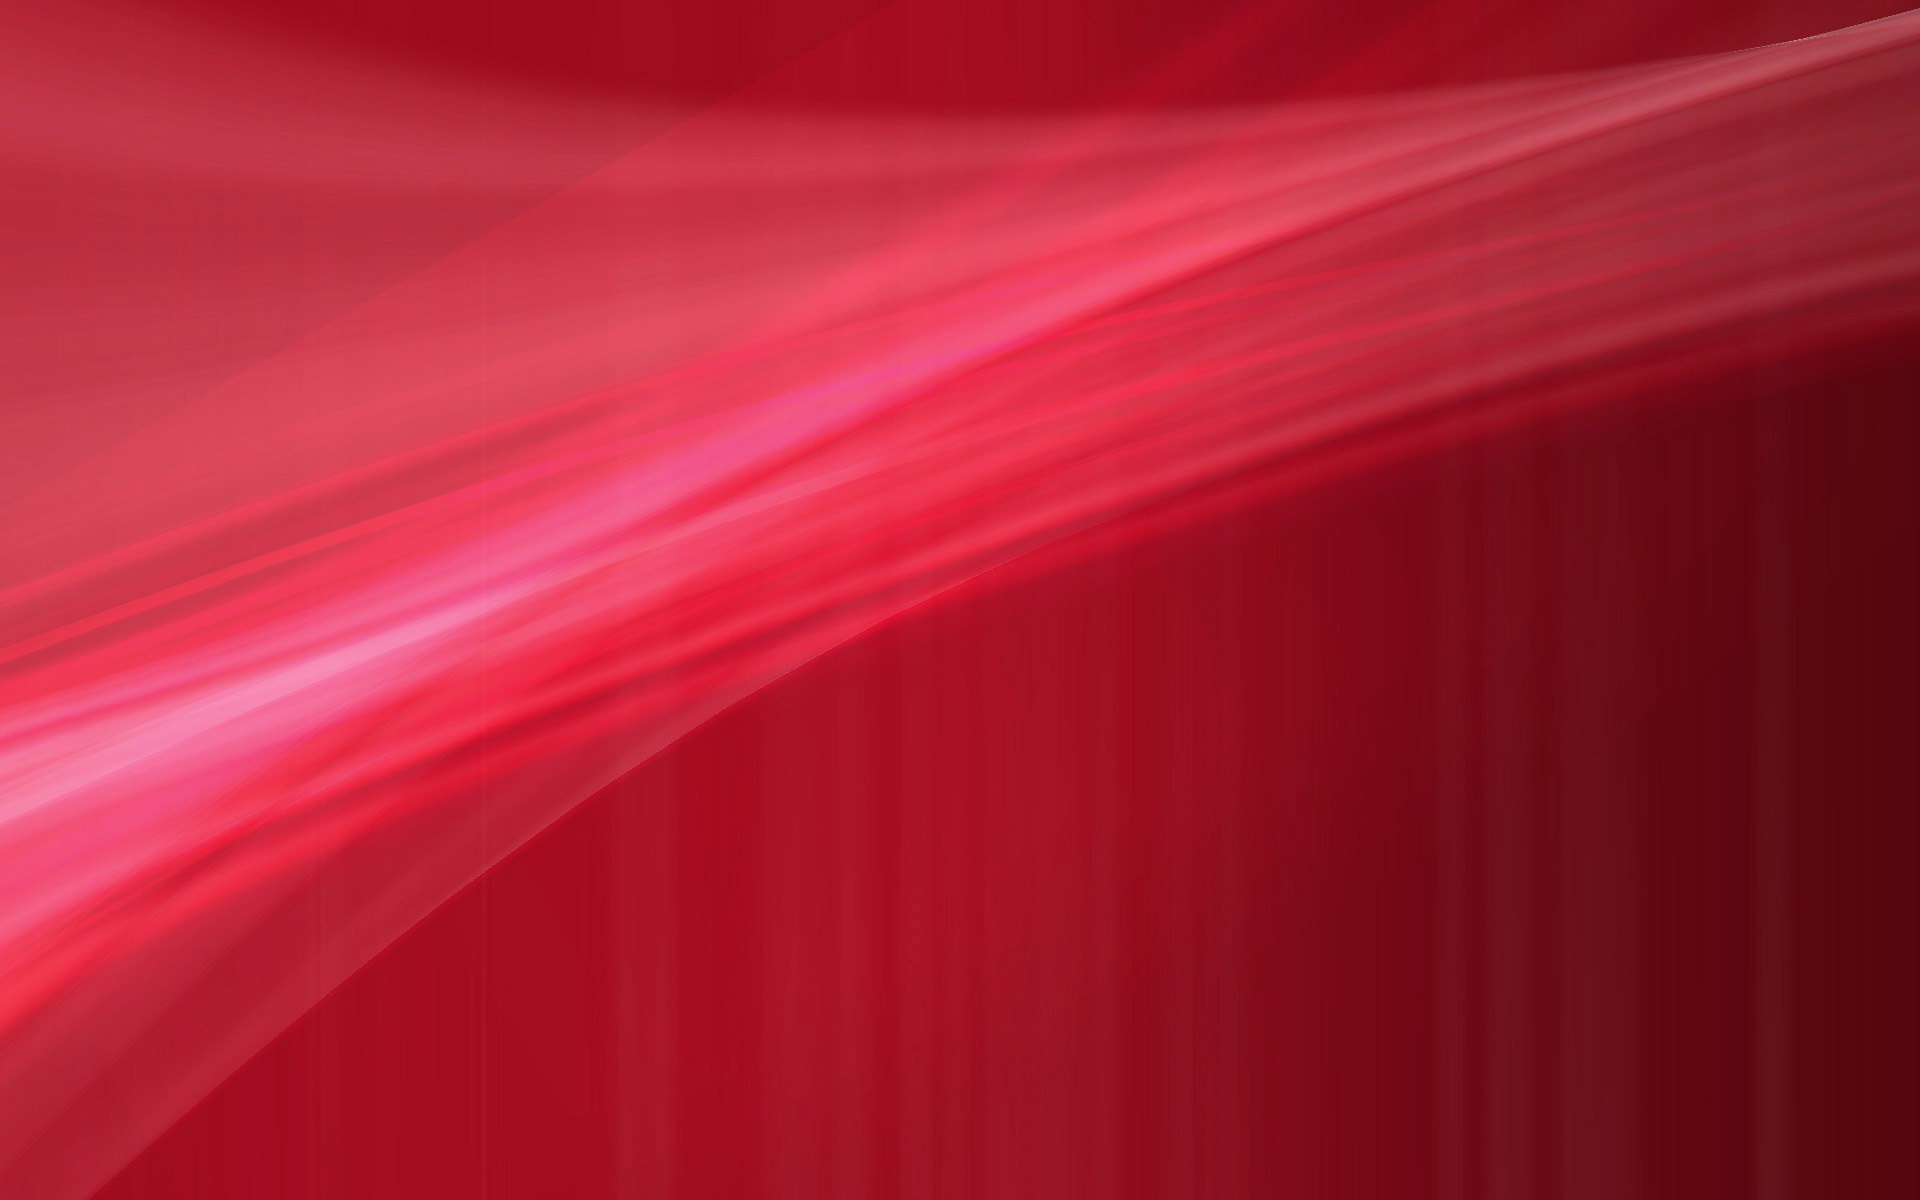 Wallpaper For Desktop Red In Abstract